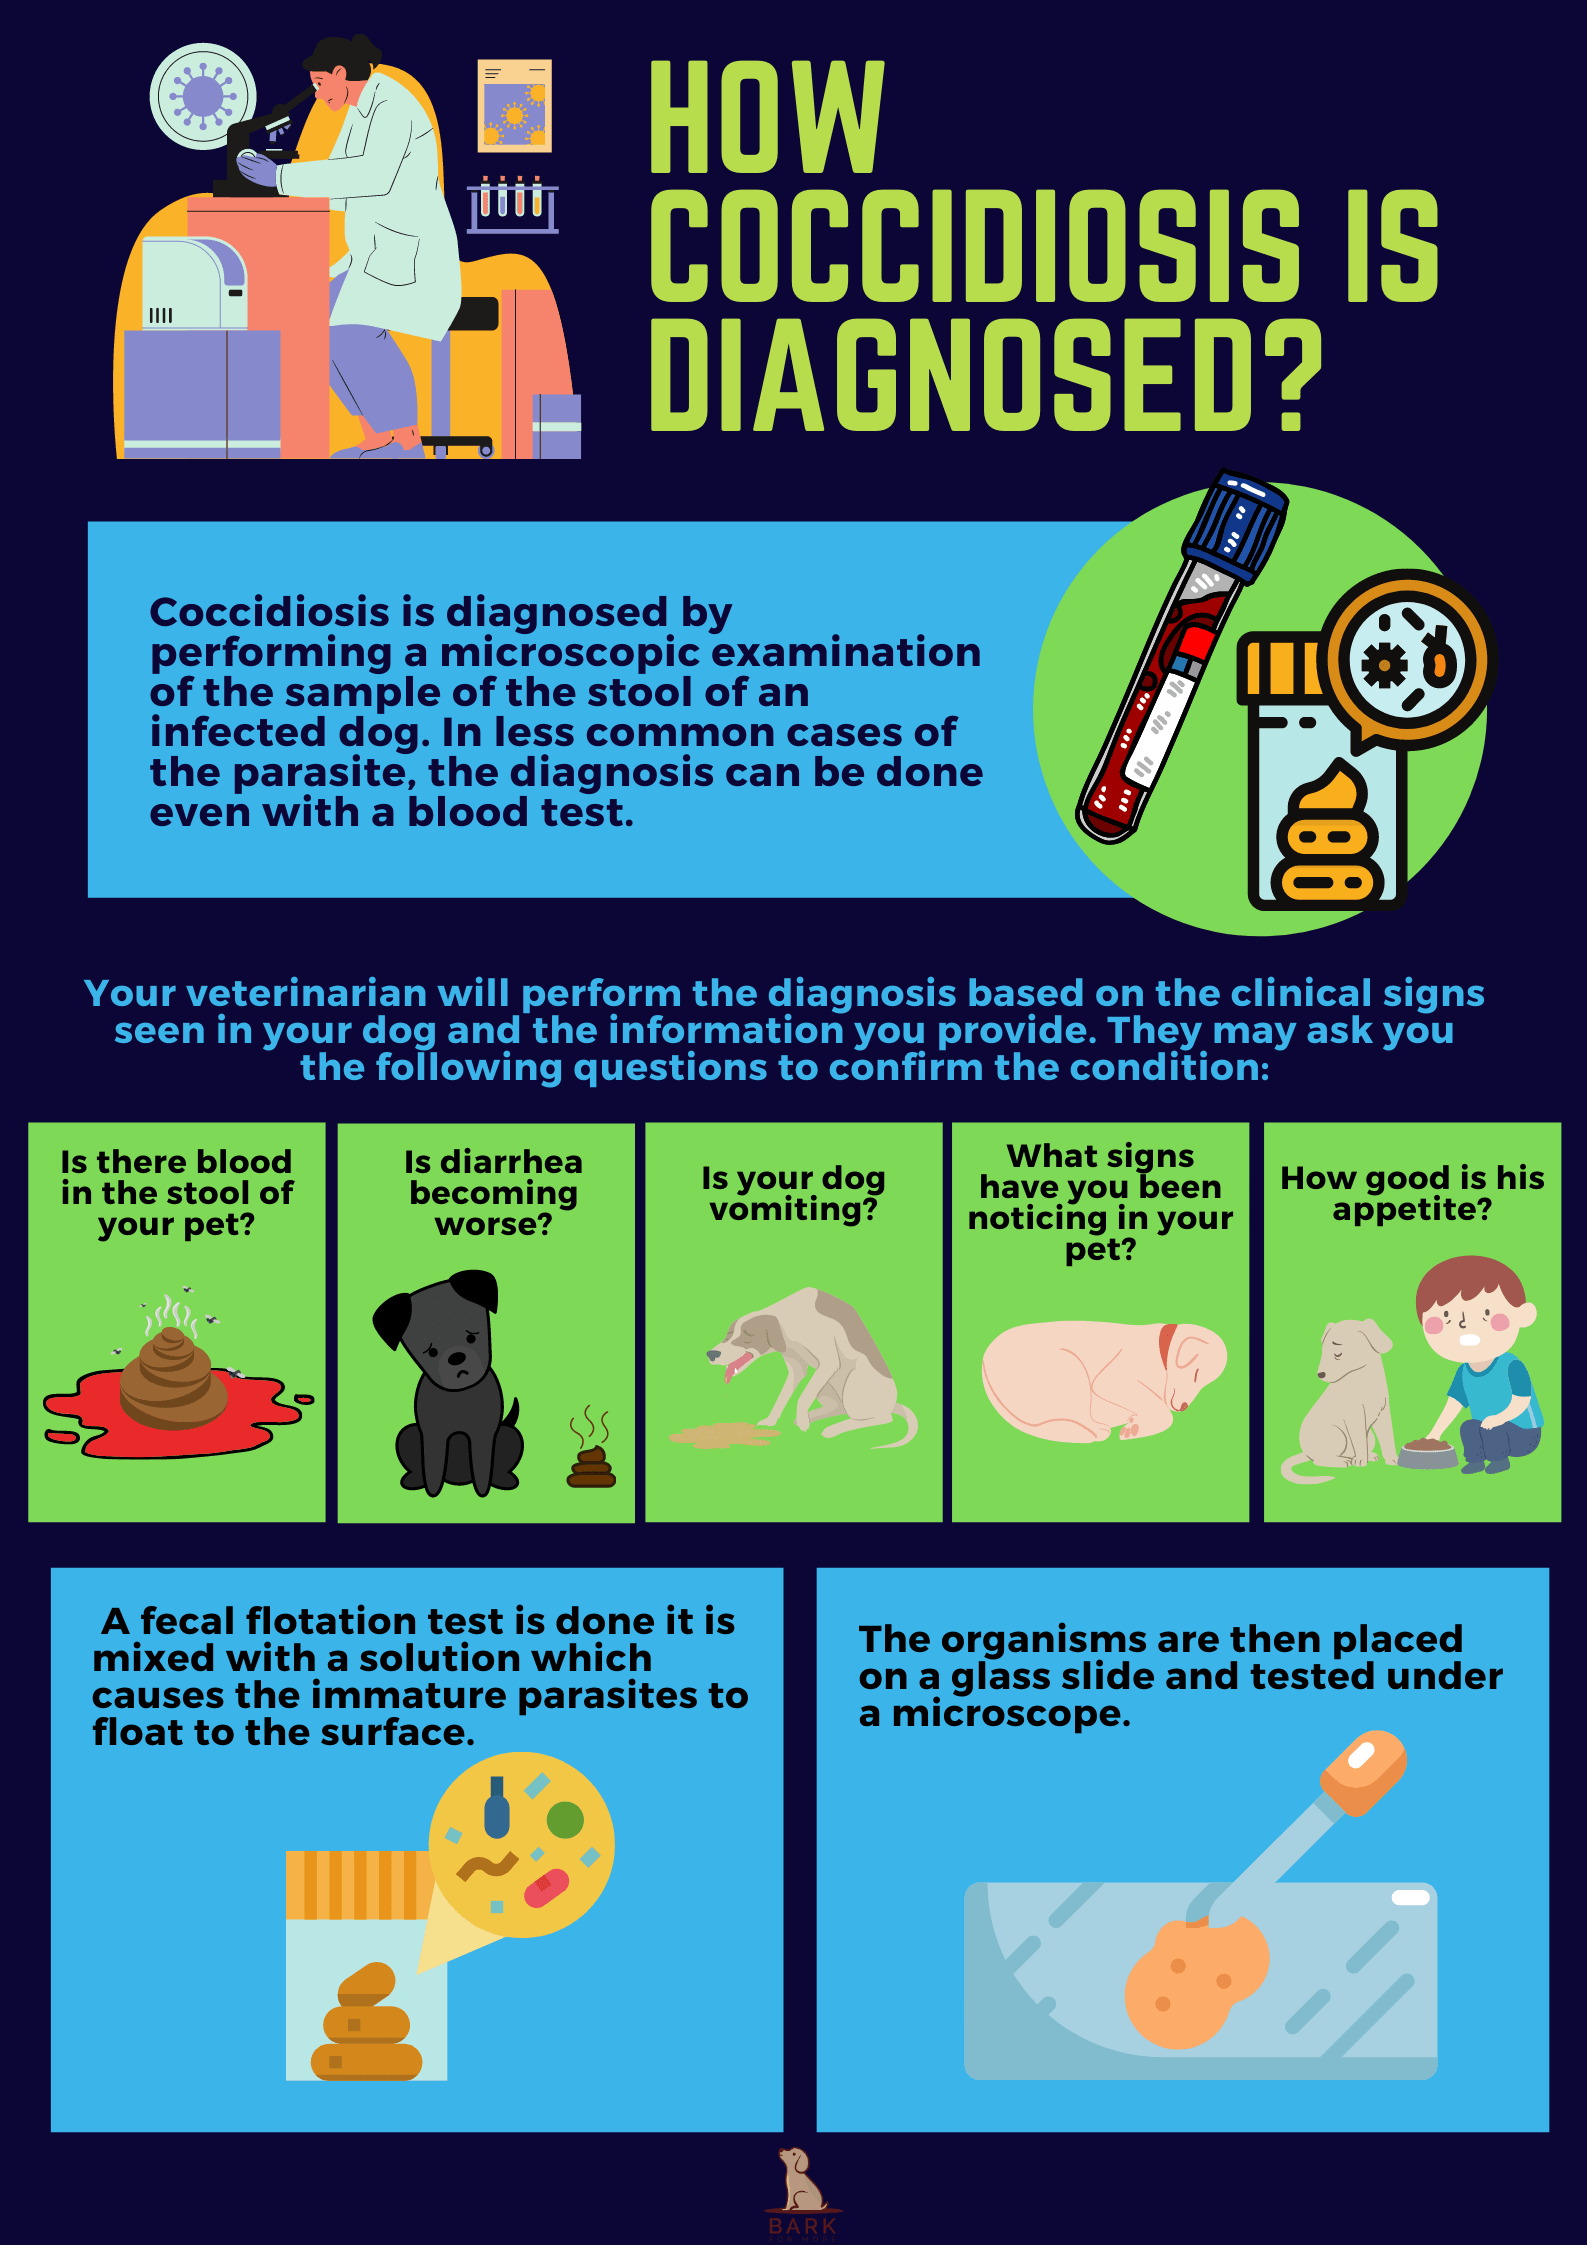 How coccidiosis is diagnosed